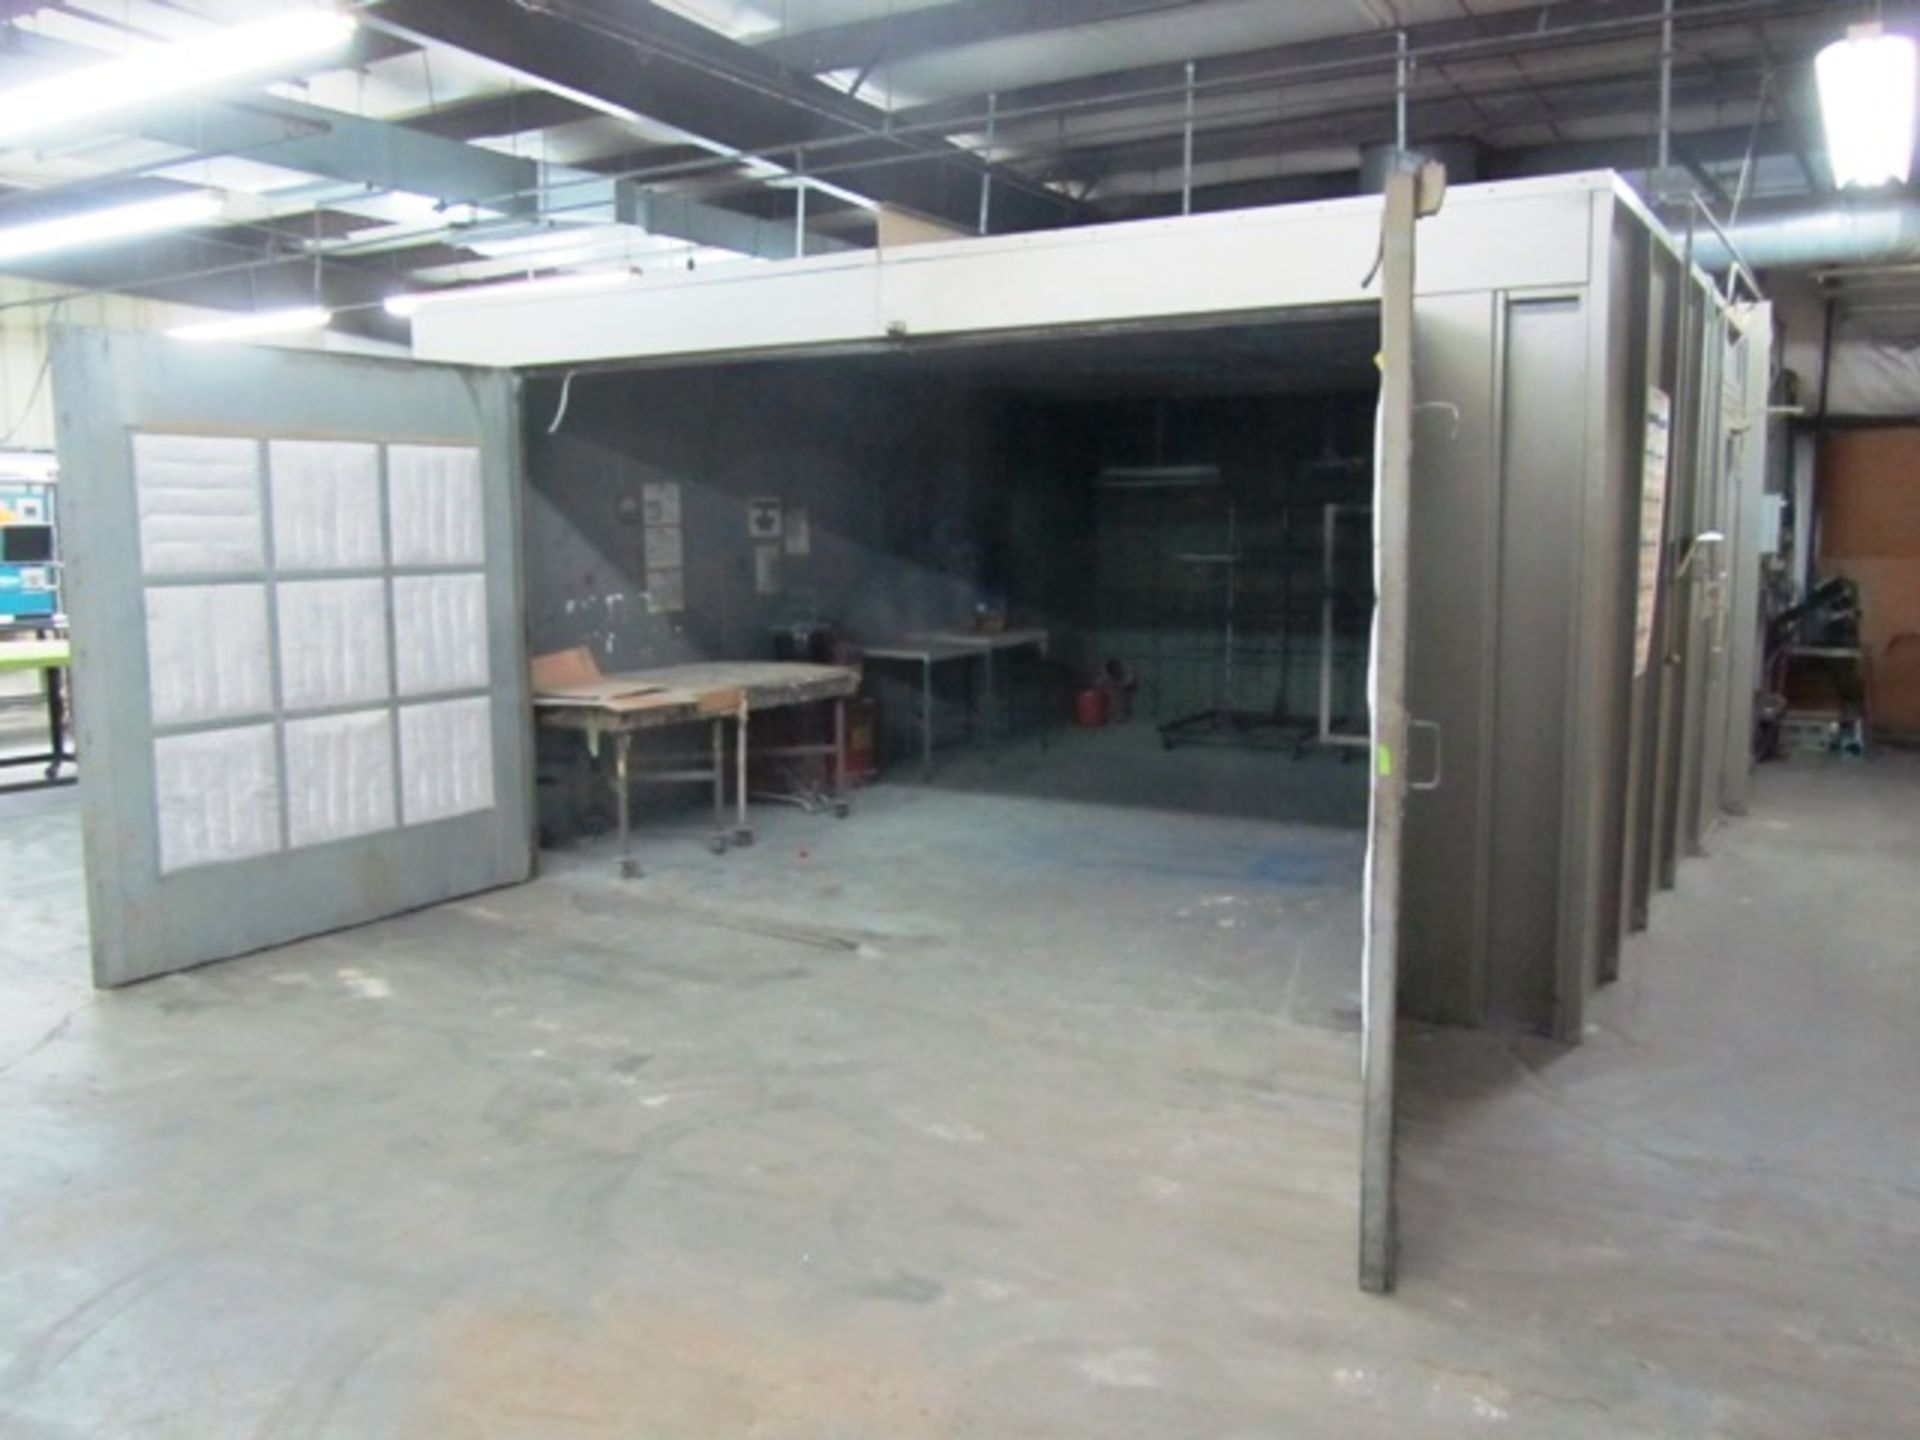 14' W x 20' L x 8' H Wet Paint Booth with Top Rear Exhaust, Double Doors, Explosion Proof Lights, - Image 2 of 2